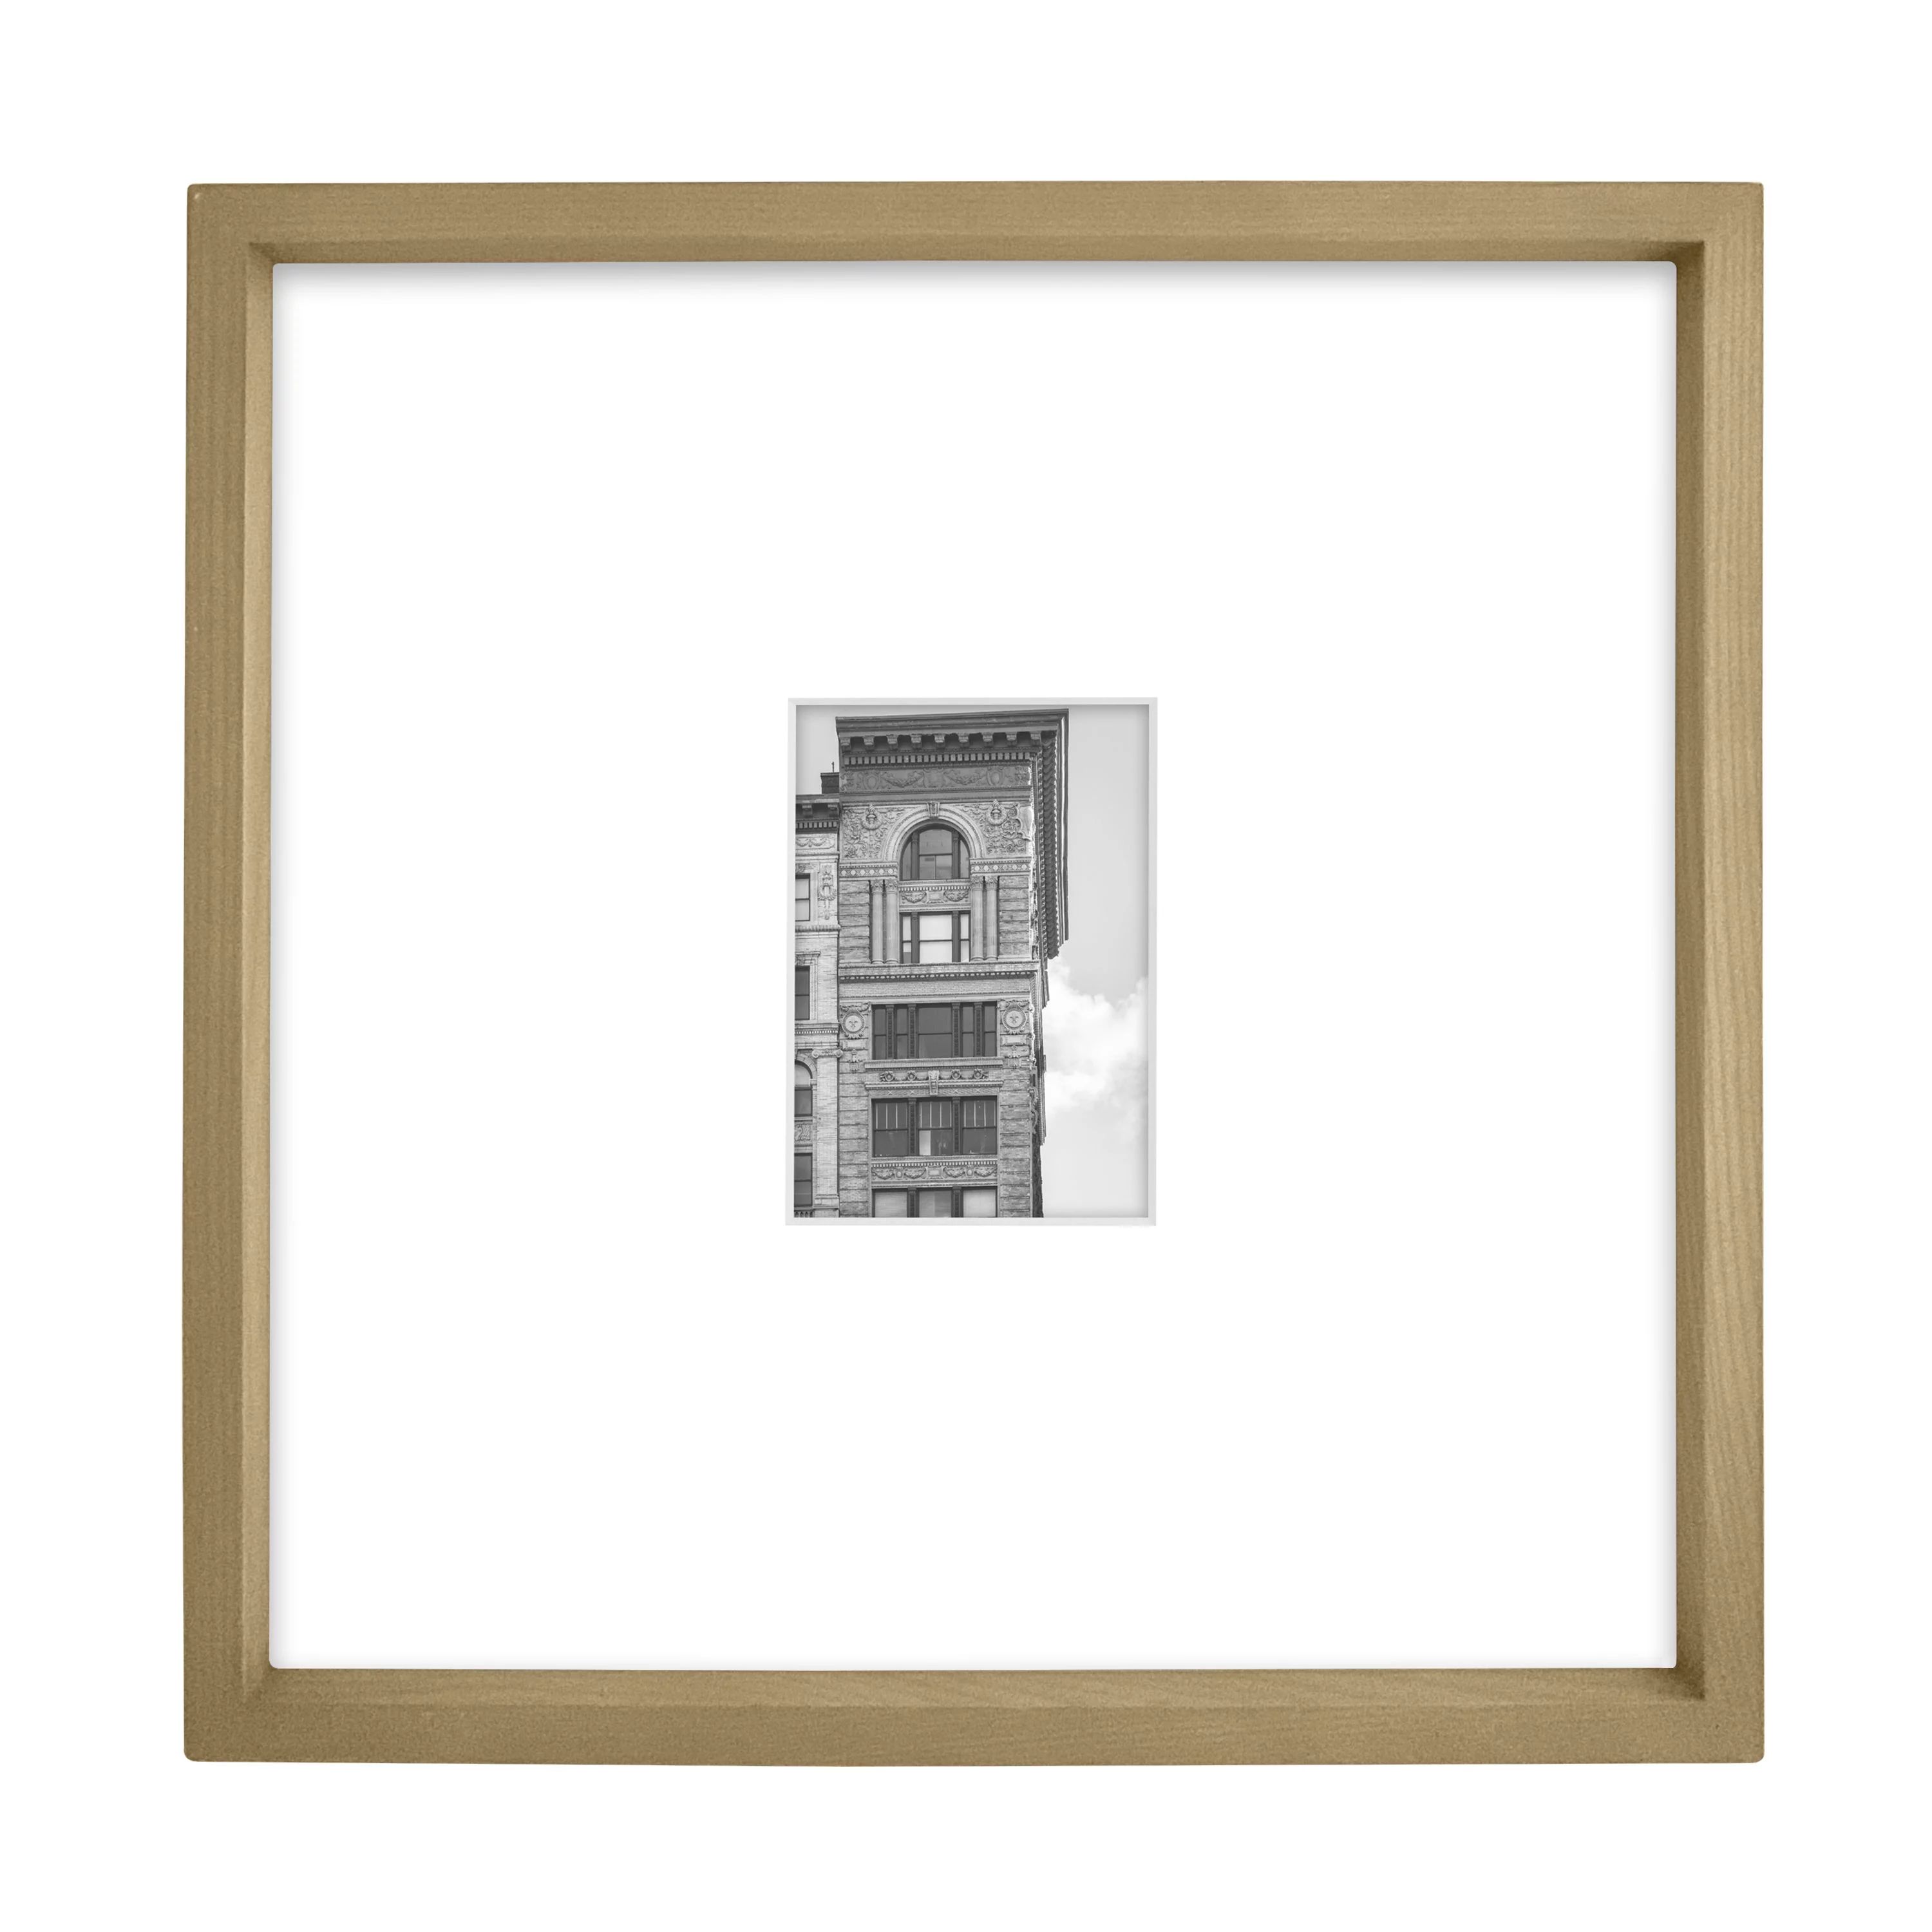 Better Homes & Gardens 18x18 matted to 5x7Wood Wall Picture Frame, Brown | Walmart (US)